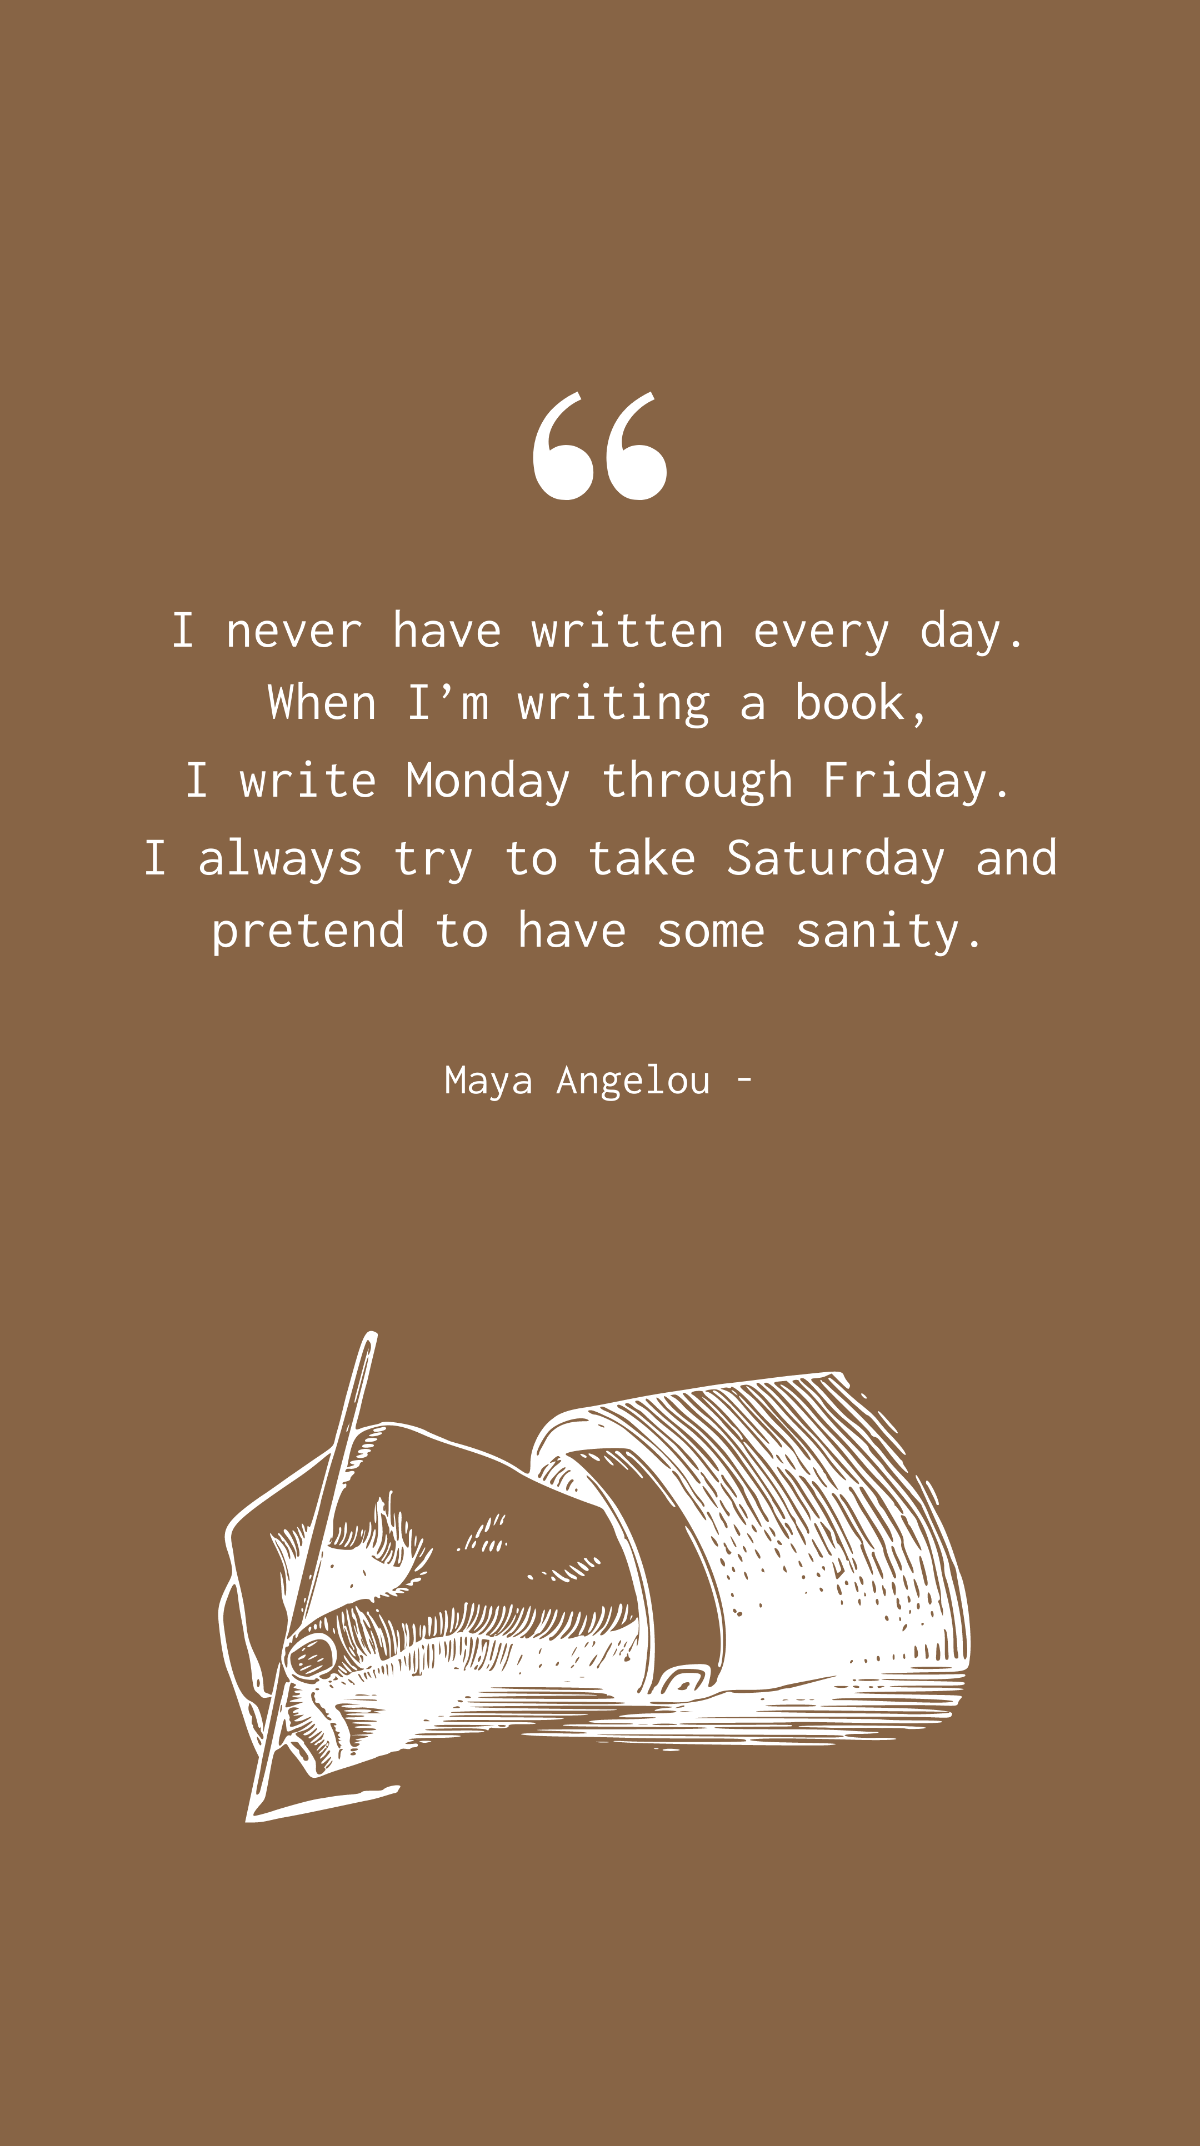 Maya Angelou - I never have written every day. When I’m writing a book, I write Monday through Friday. I always try to take Saturday and pretend to have some sanity. Template